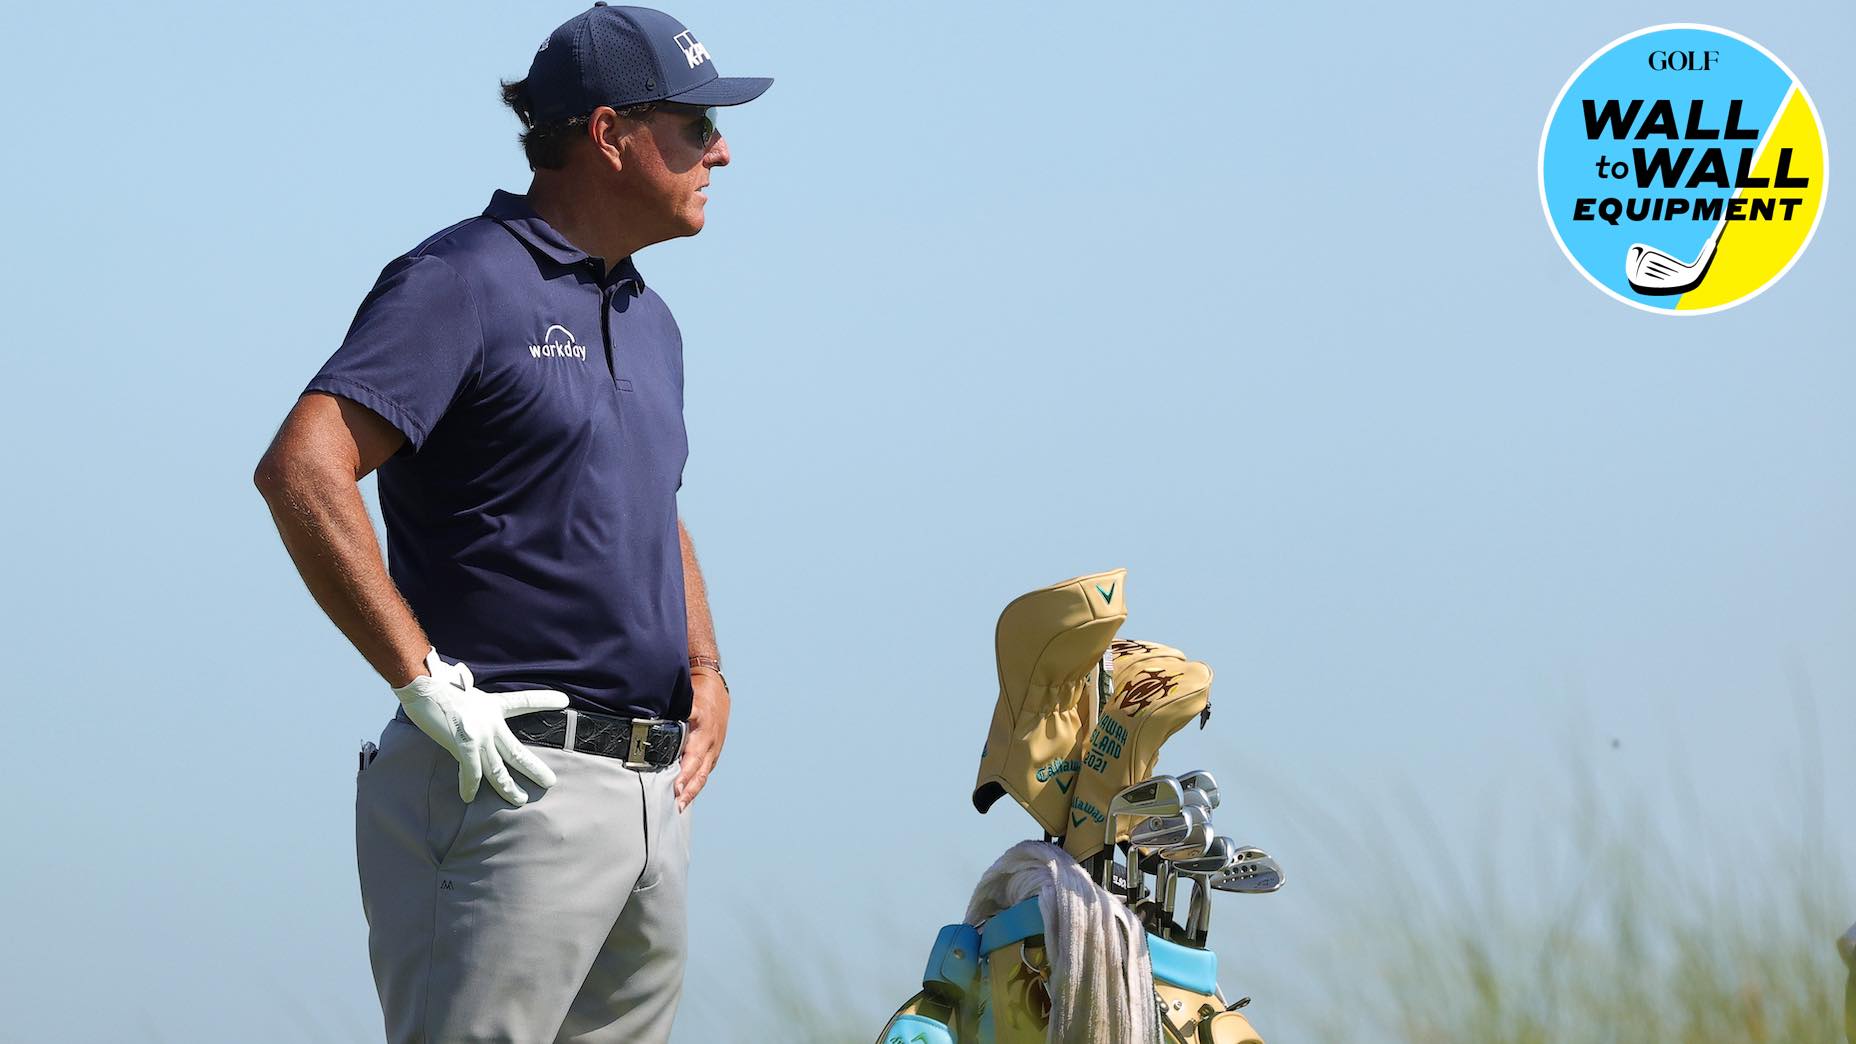 Phil Mickelson's gear dilemma at the Championship: Wall-to-Wall